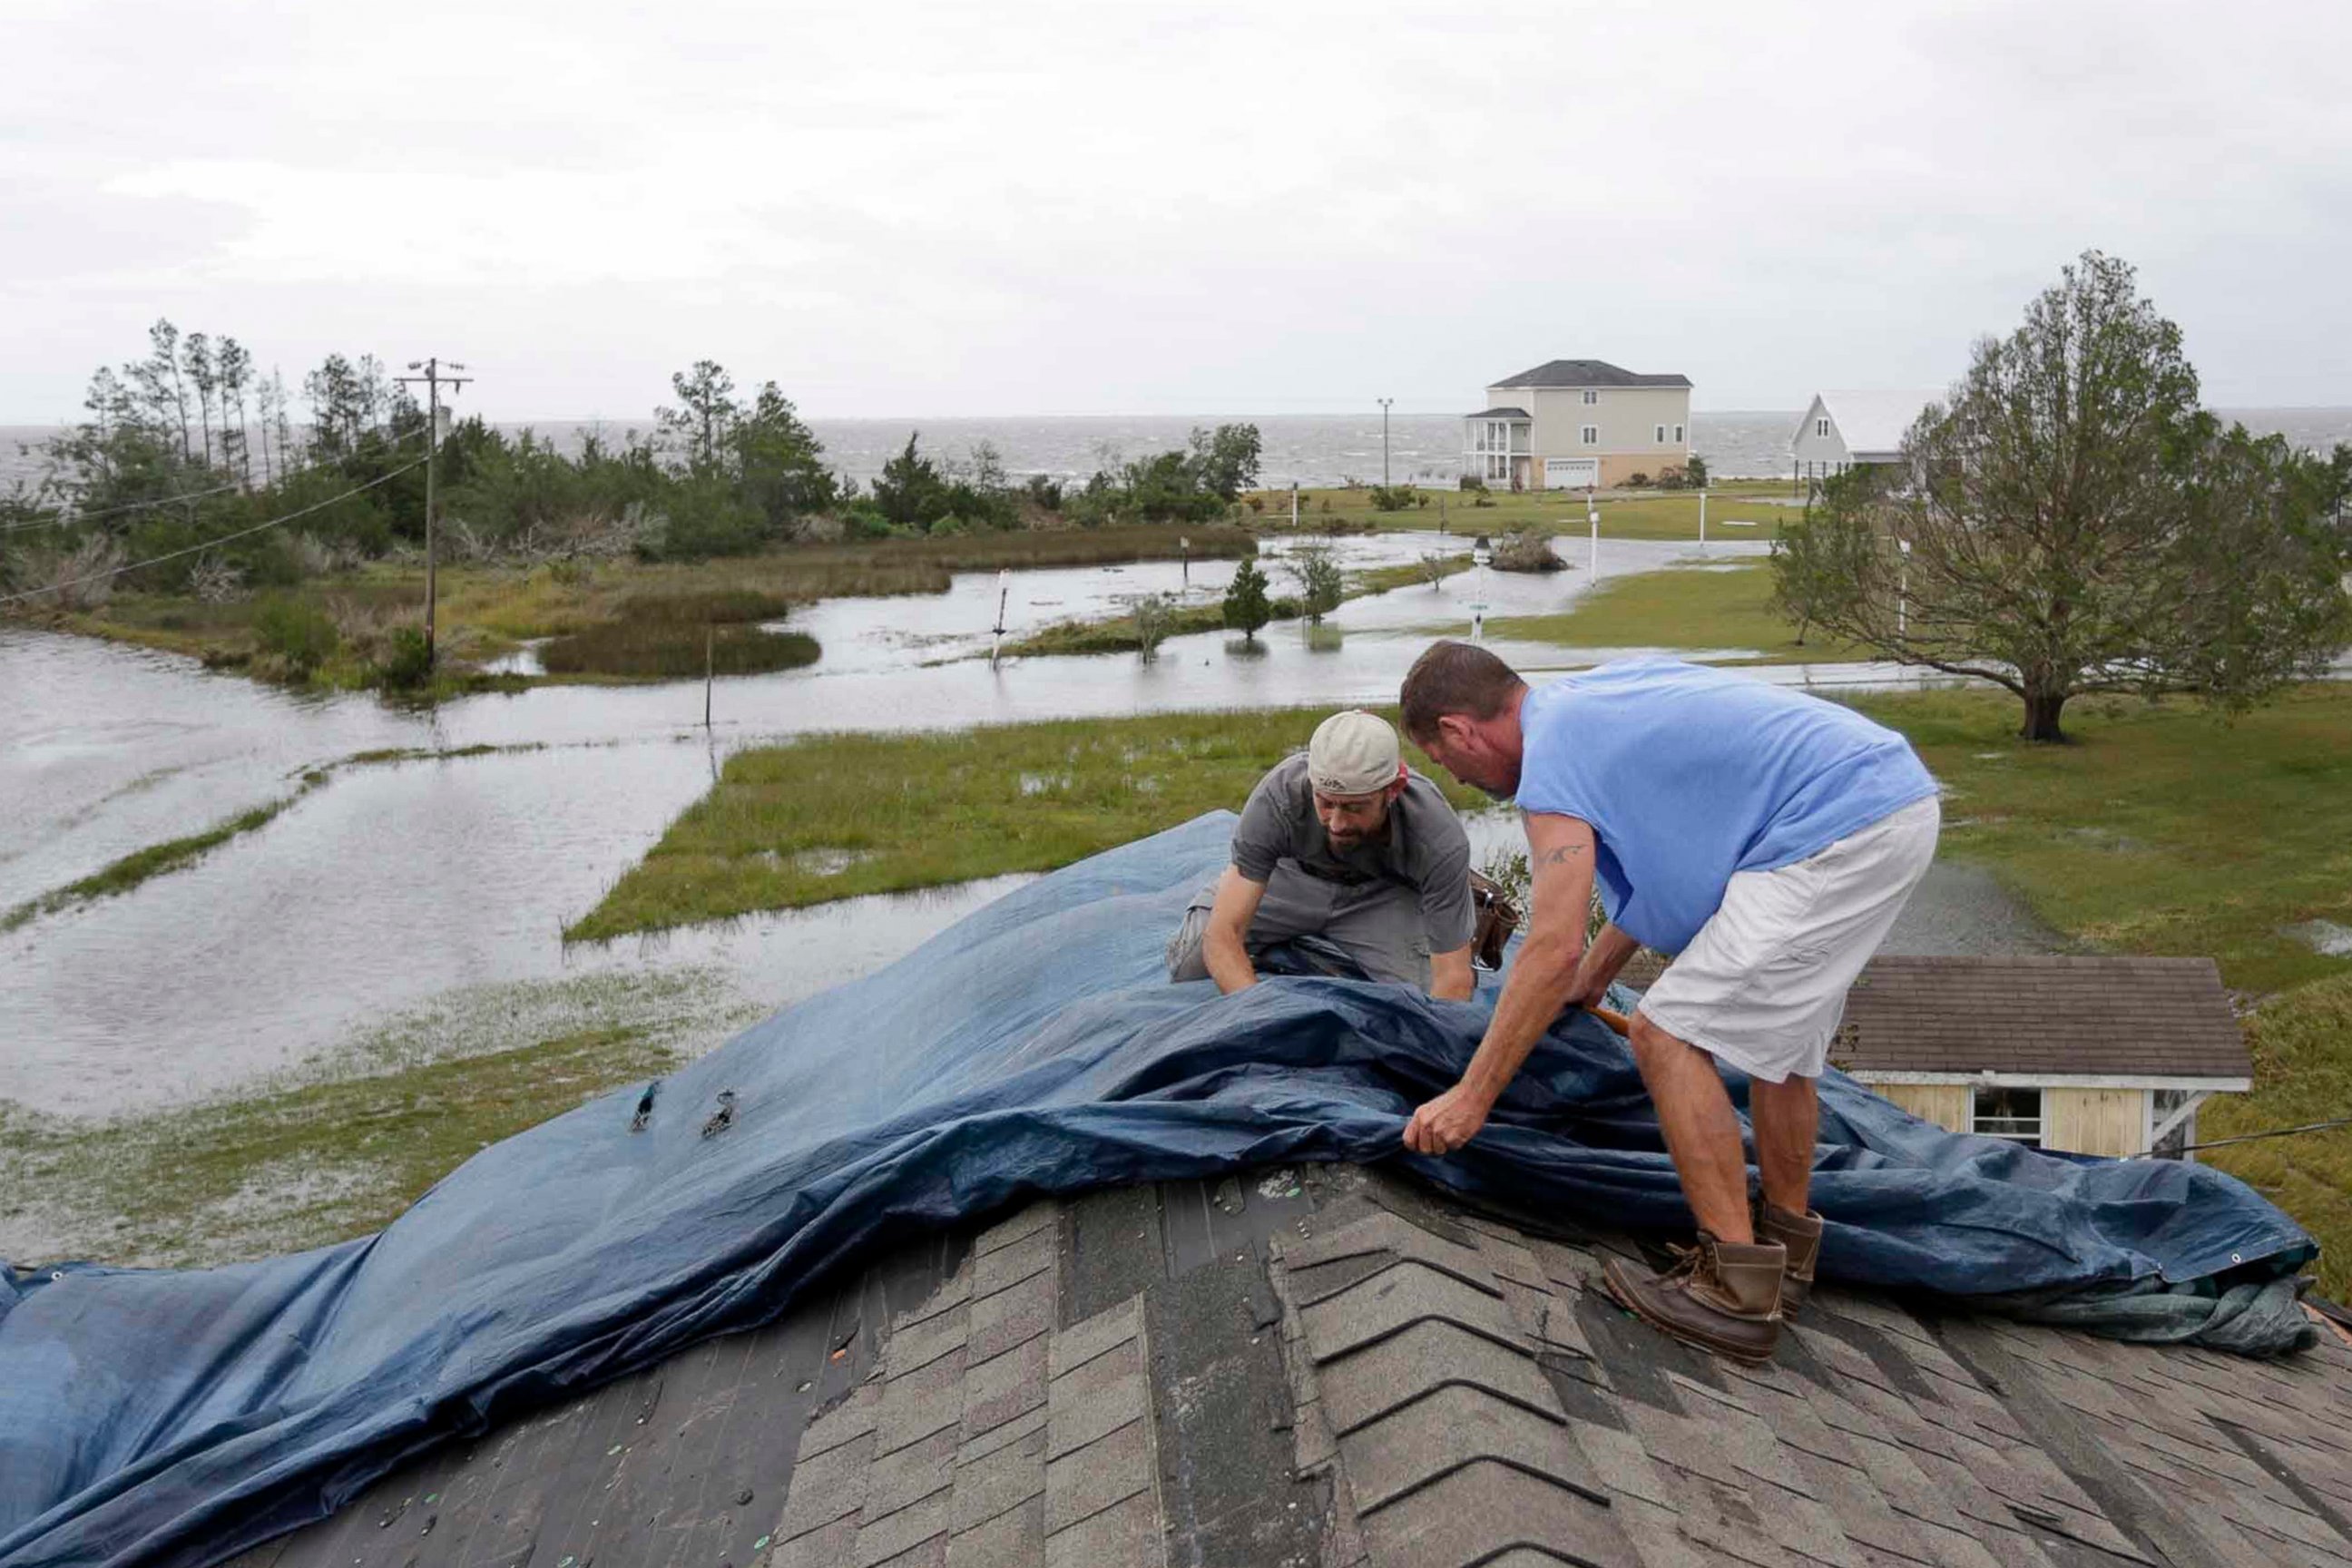 Jeff Pyron, left, and Daniel Lilly cover Lilly's roof after Hurricane Florence hit Davis N.C., Saturday, Sept. 15, 2018. The town had 4 1/2 feet of storm surge. 